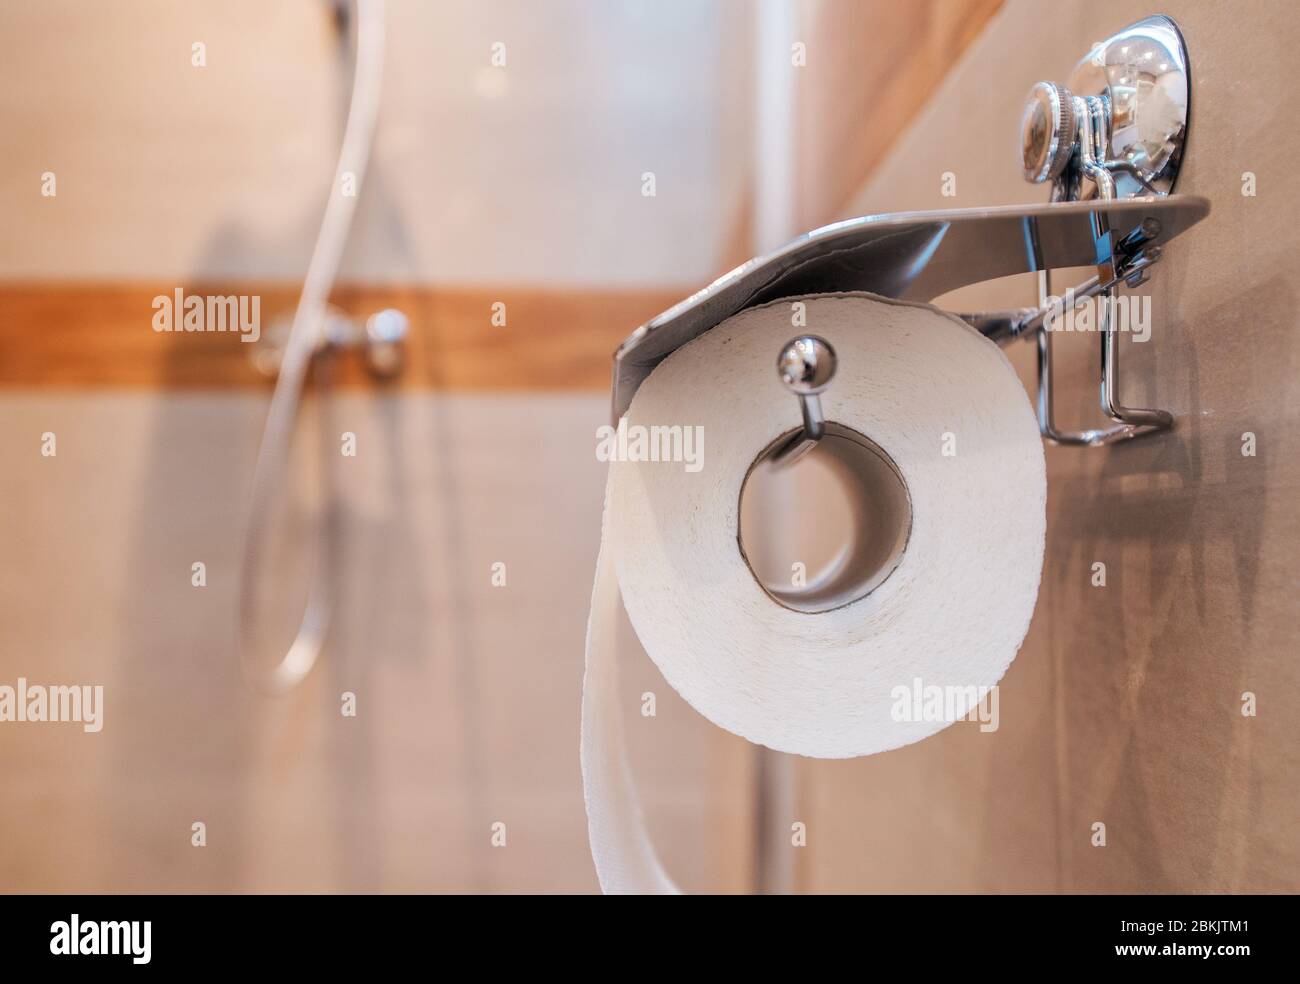 Close Up Of Toilet Paper Holder In RV With Shower In Background Stock Photo